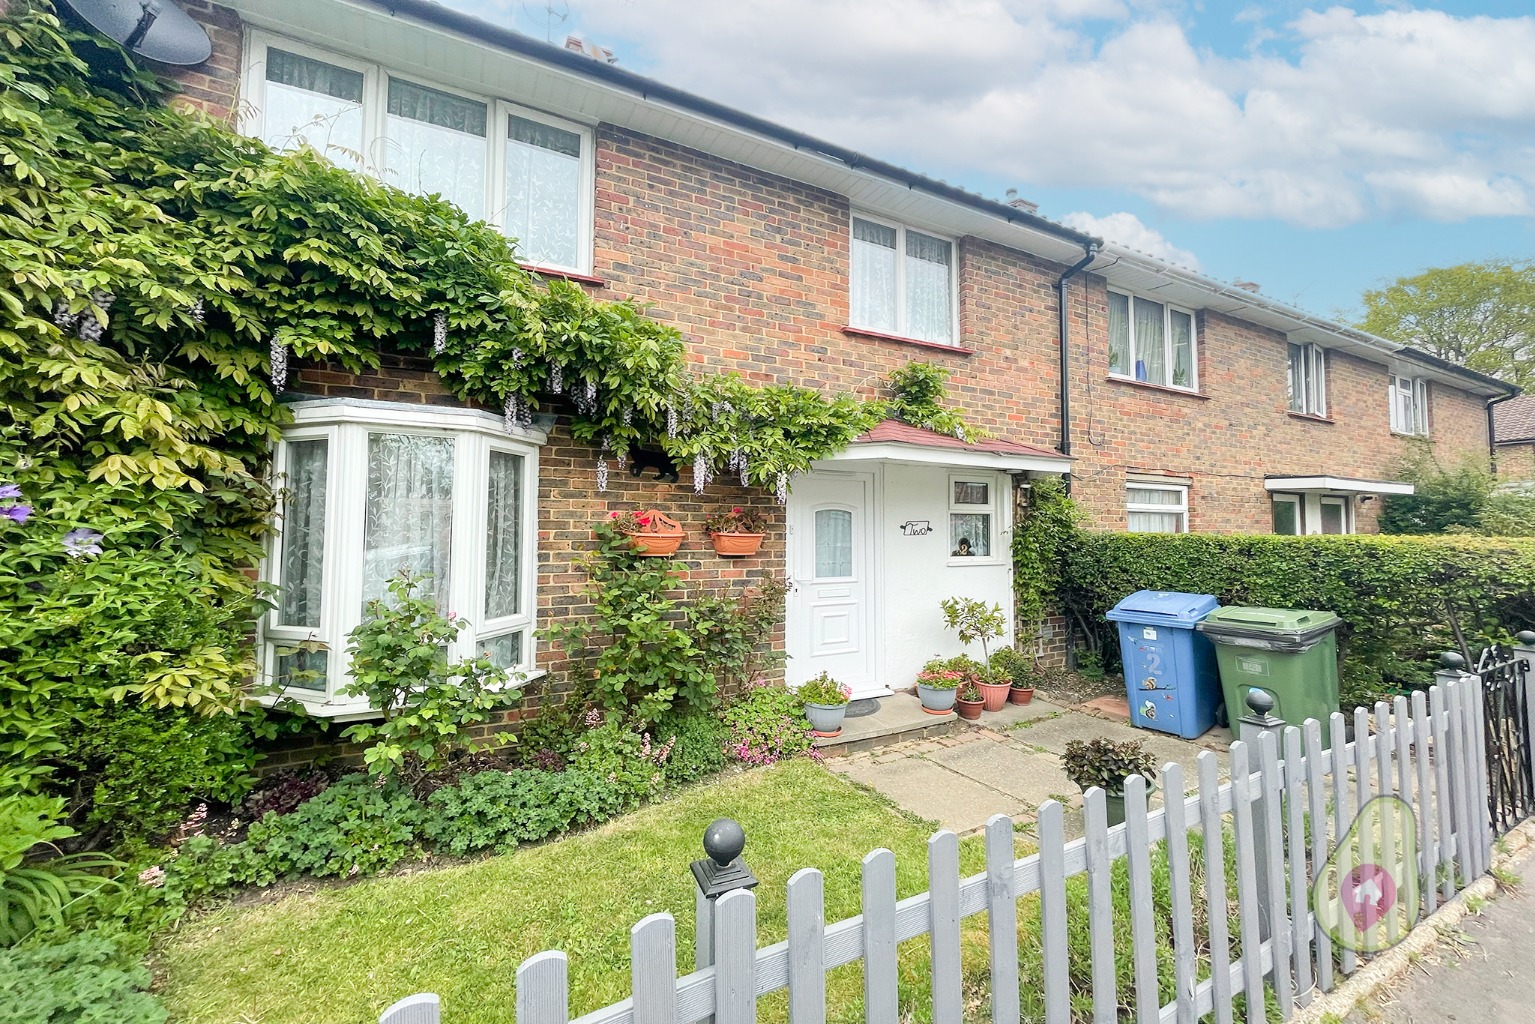 A well loved and beautifully presented three bedroom home, in a quiet location within Bullbrook - conveniently situation just 1 mile to Martins Heron train station, as well as Bracknell Town Centre and many local parks and recreation grounds.